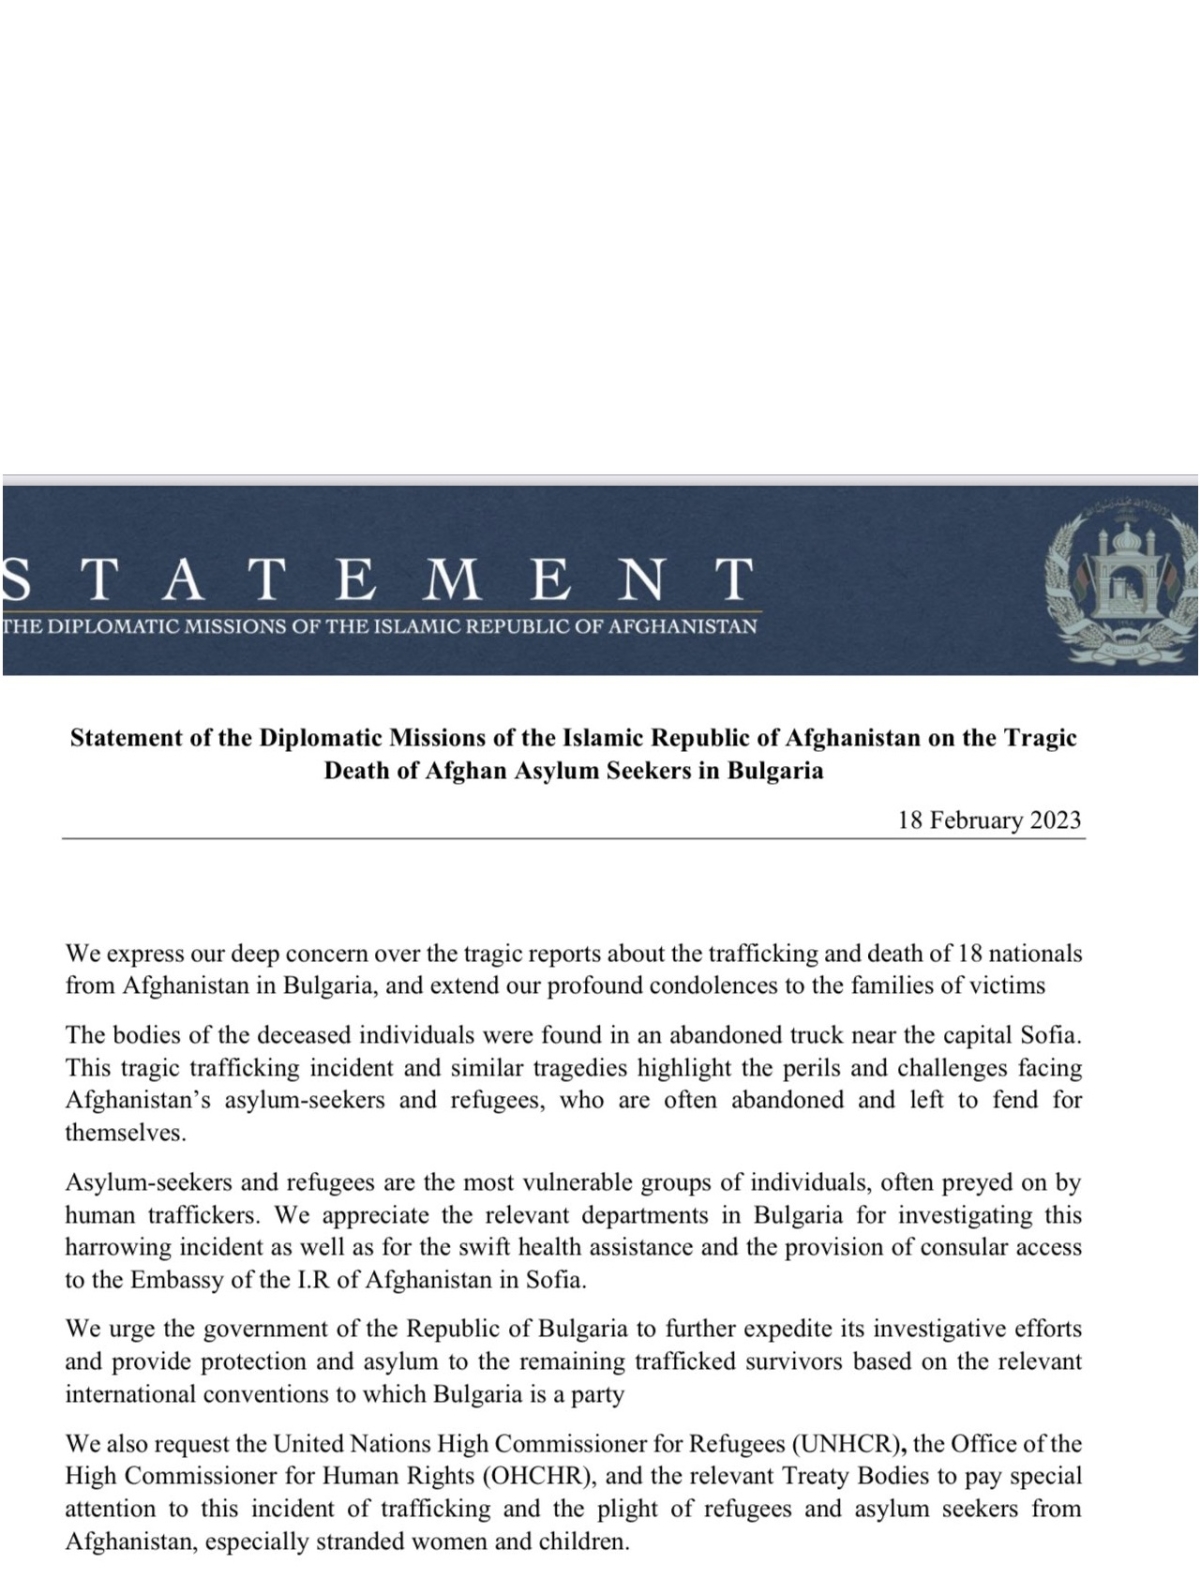 STATEMENT OF THE DIPLOMATIC MISSIONS OF THE ISLAMIC REPUBLIC OF AFGHANISTAN ON THE TRAGIC DEATH OF AFGHAN ASYLUM SEEKERS IN BULGARIA